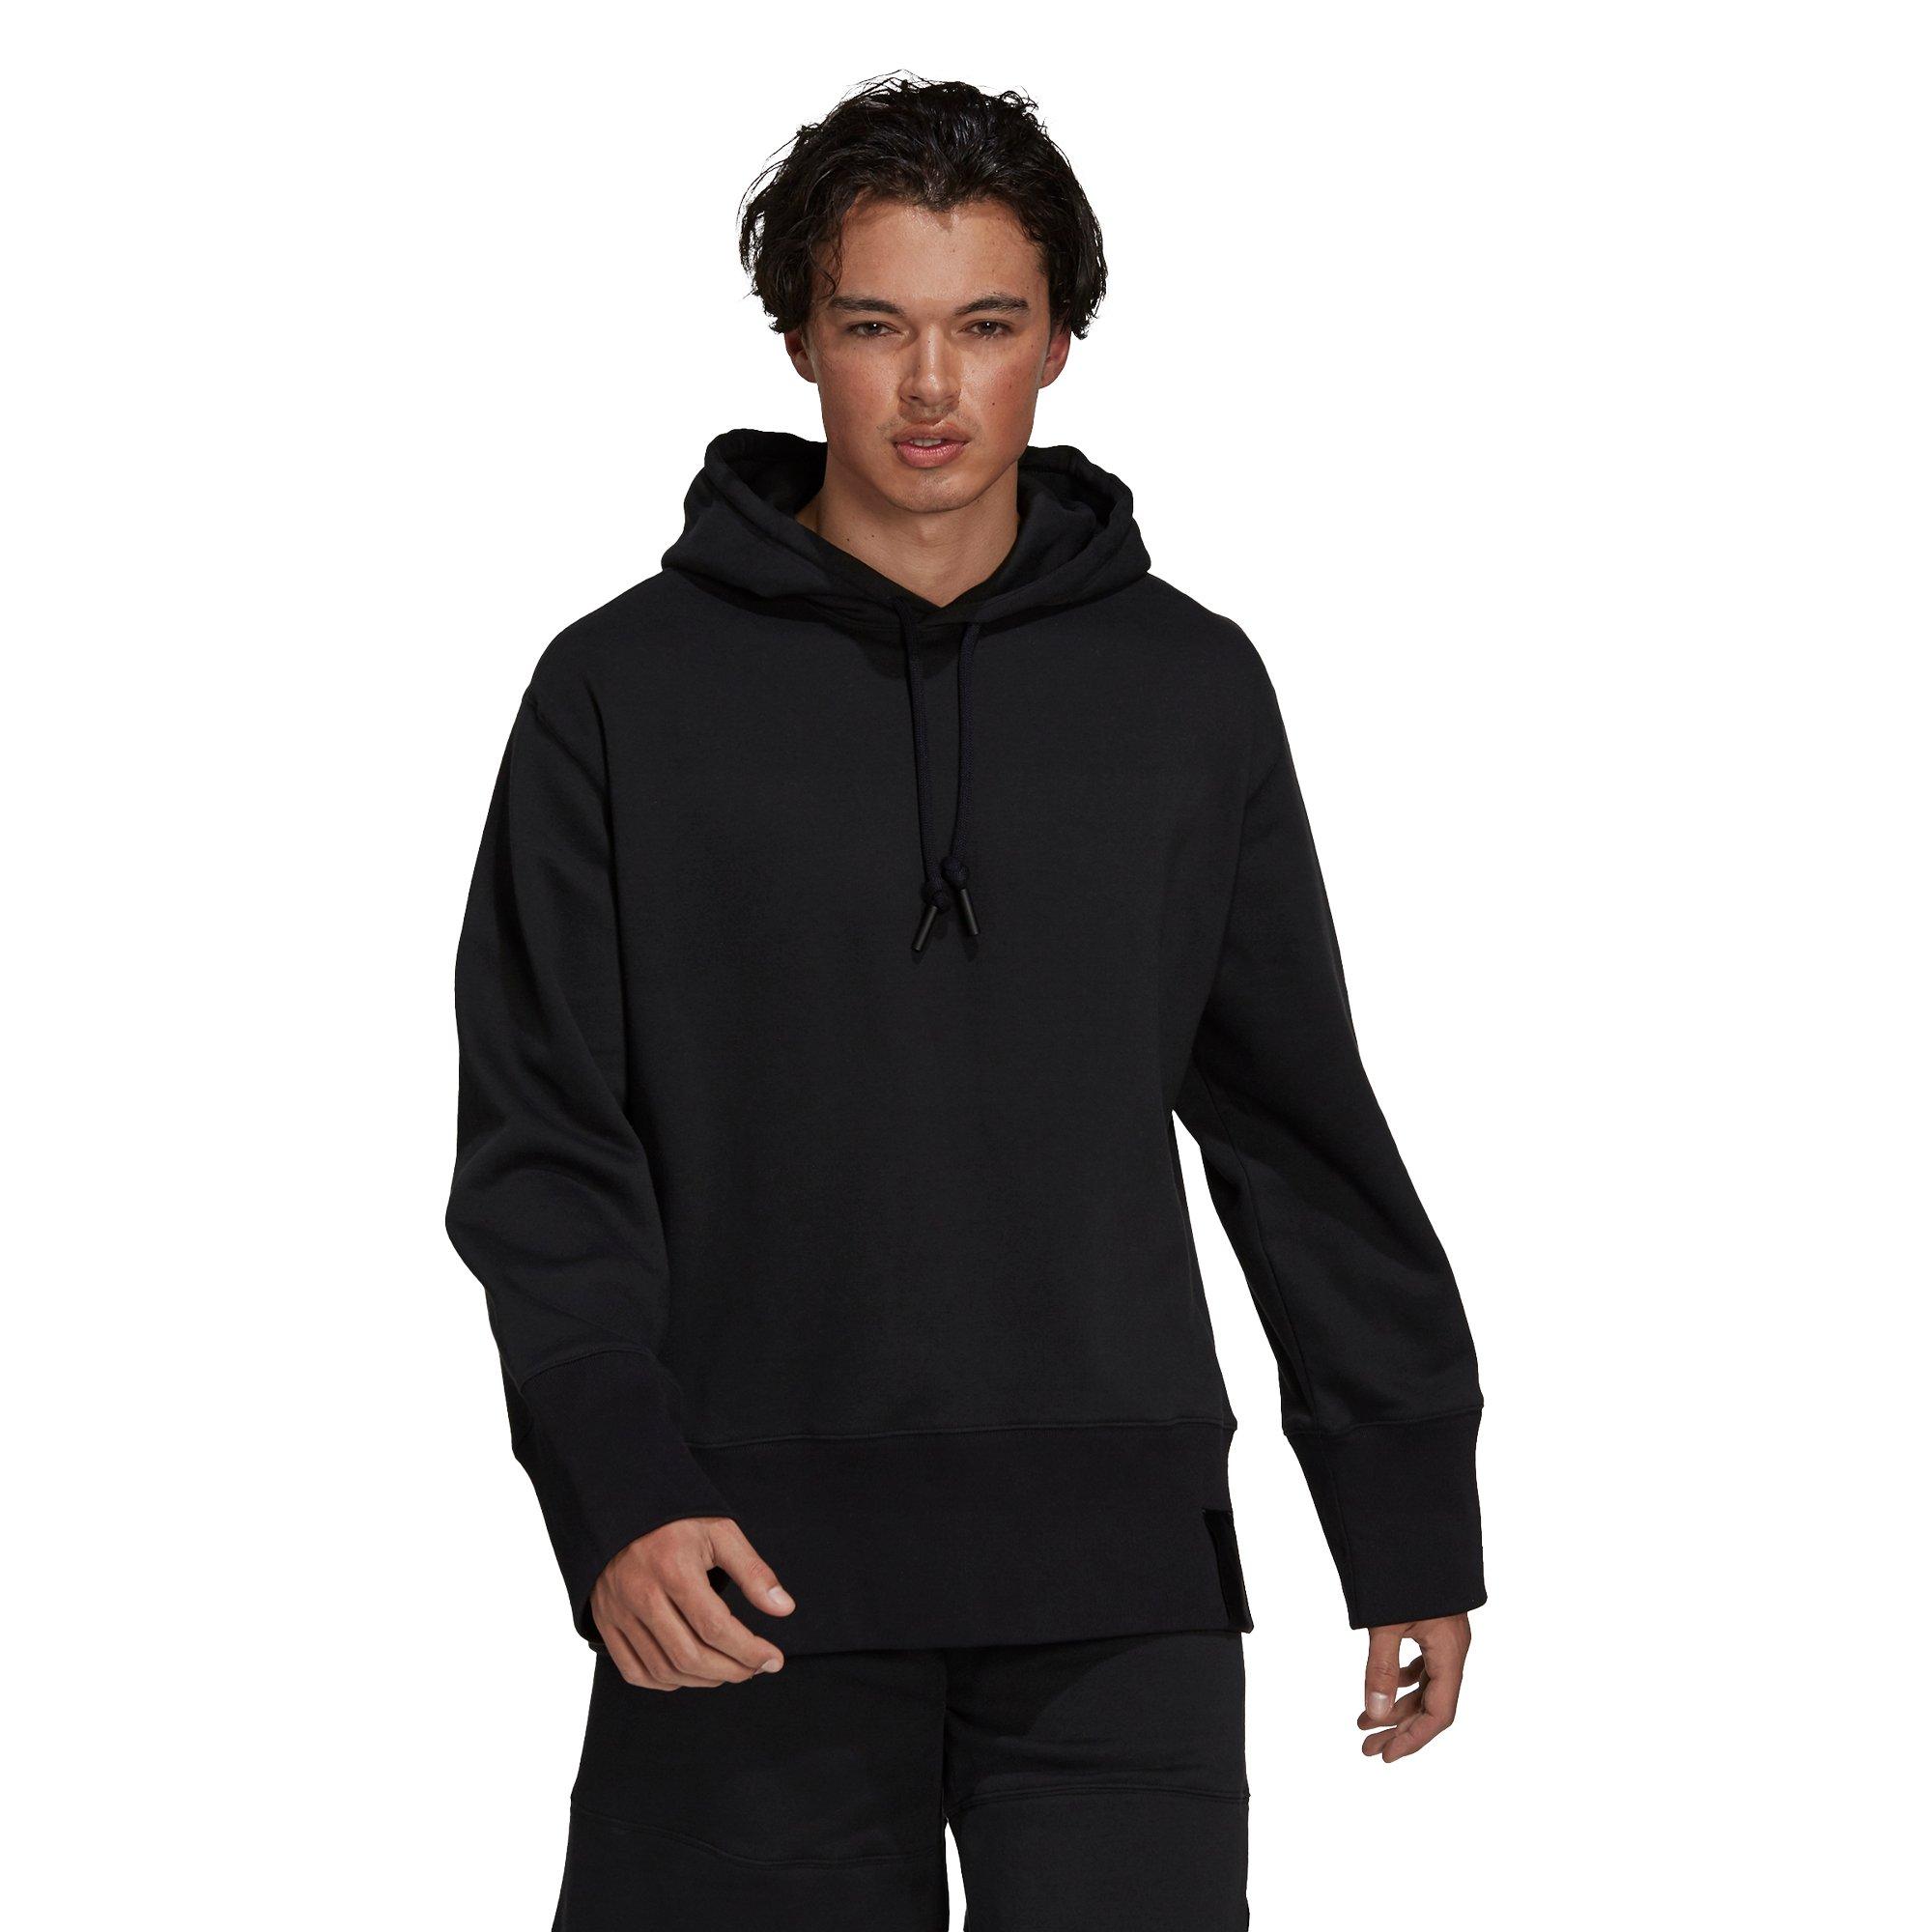 adidas Men's Comfy and Chill Full Zip Hoodie